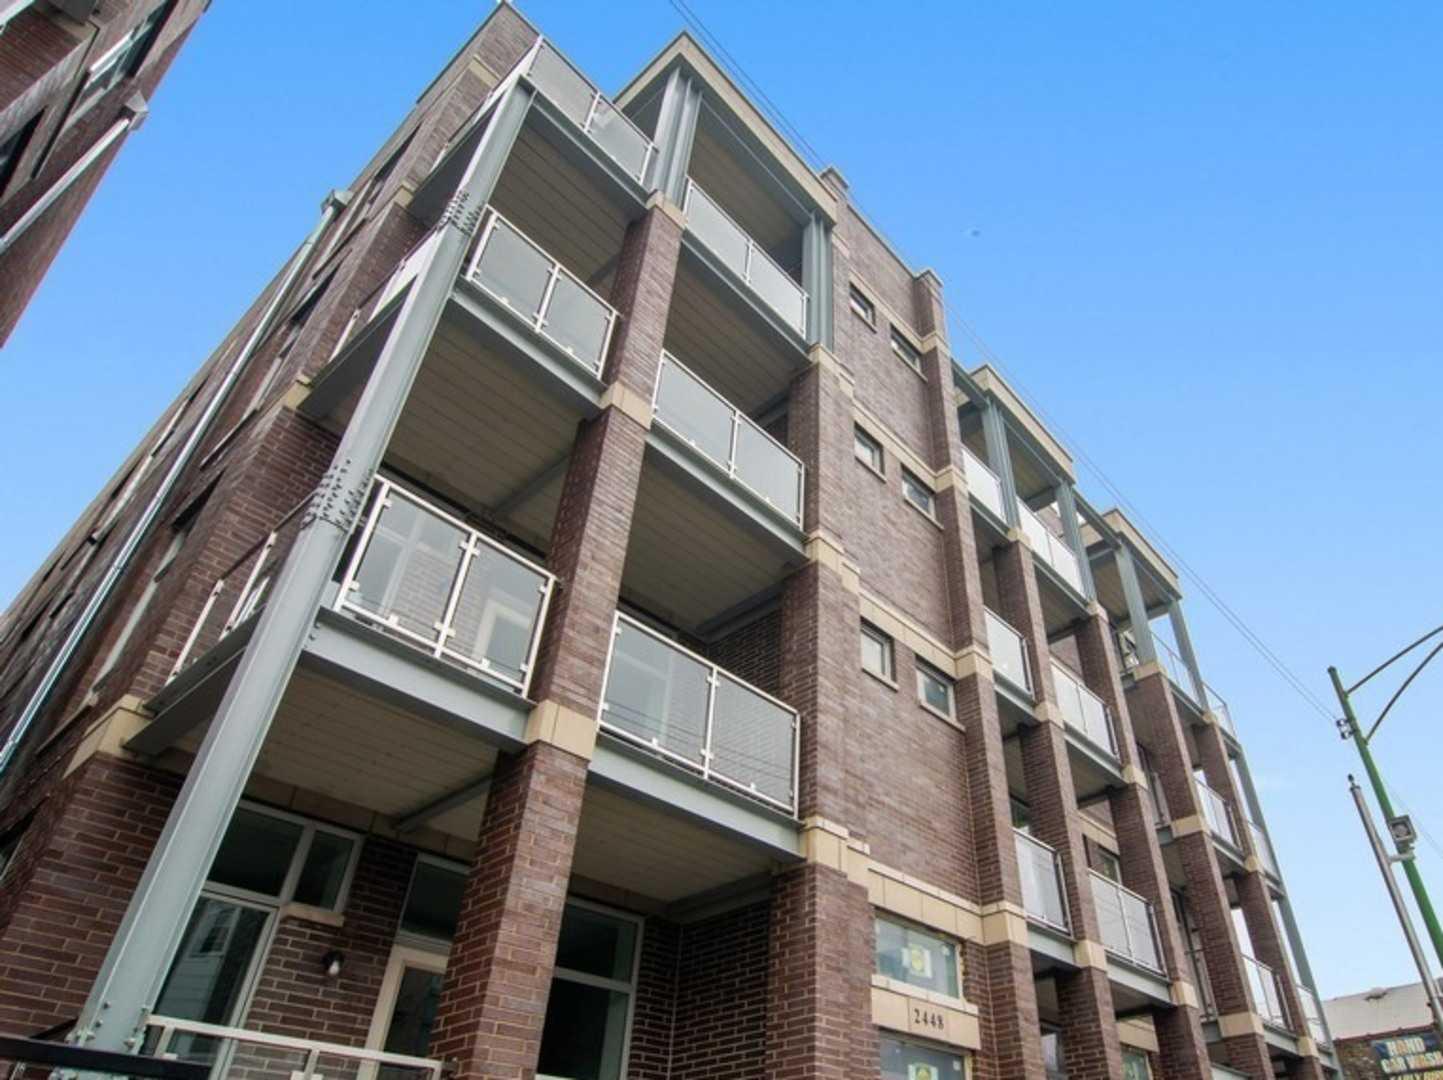 2448-50 Clybourn, 12026011, Chicago, Multi Family 5+,  for sale, Robinson Real Estate